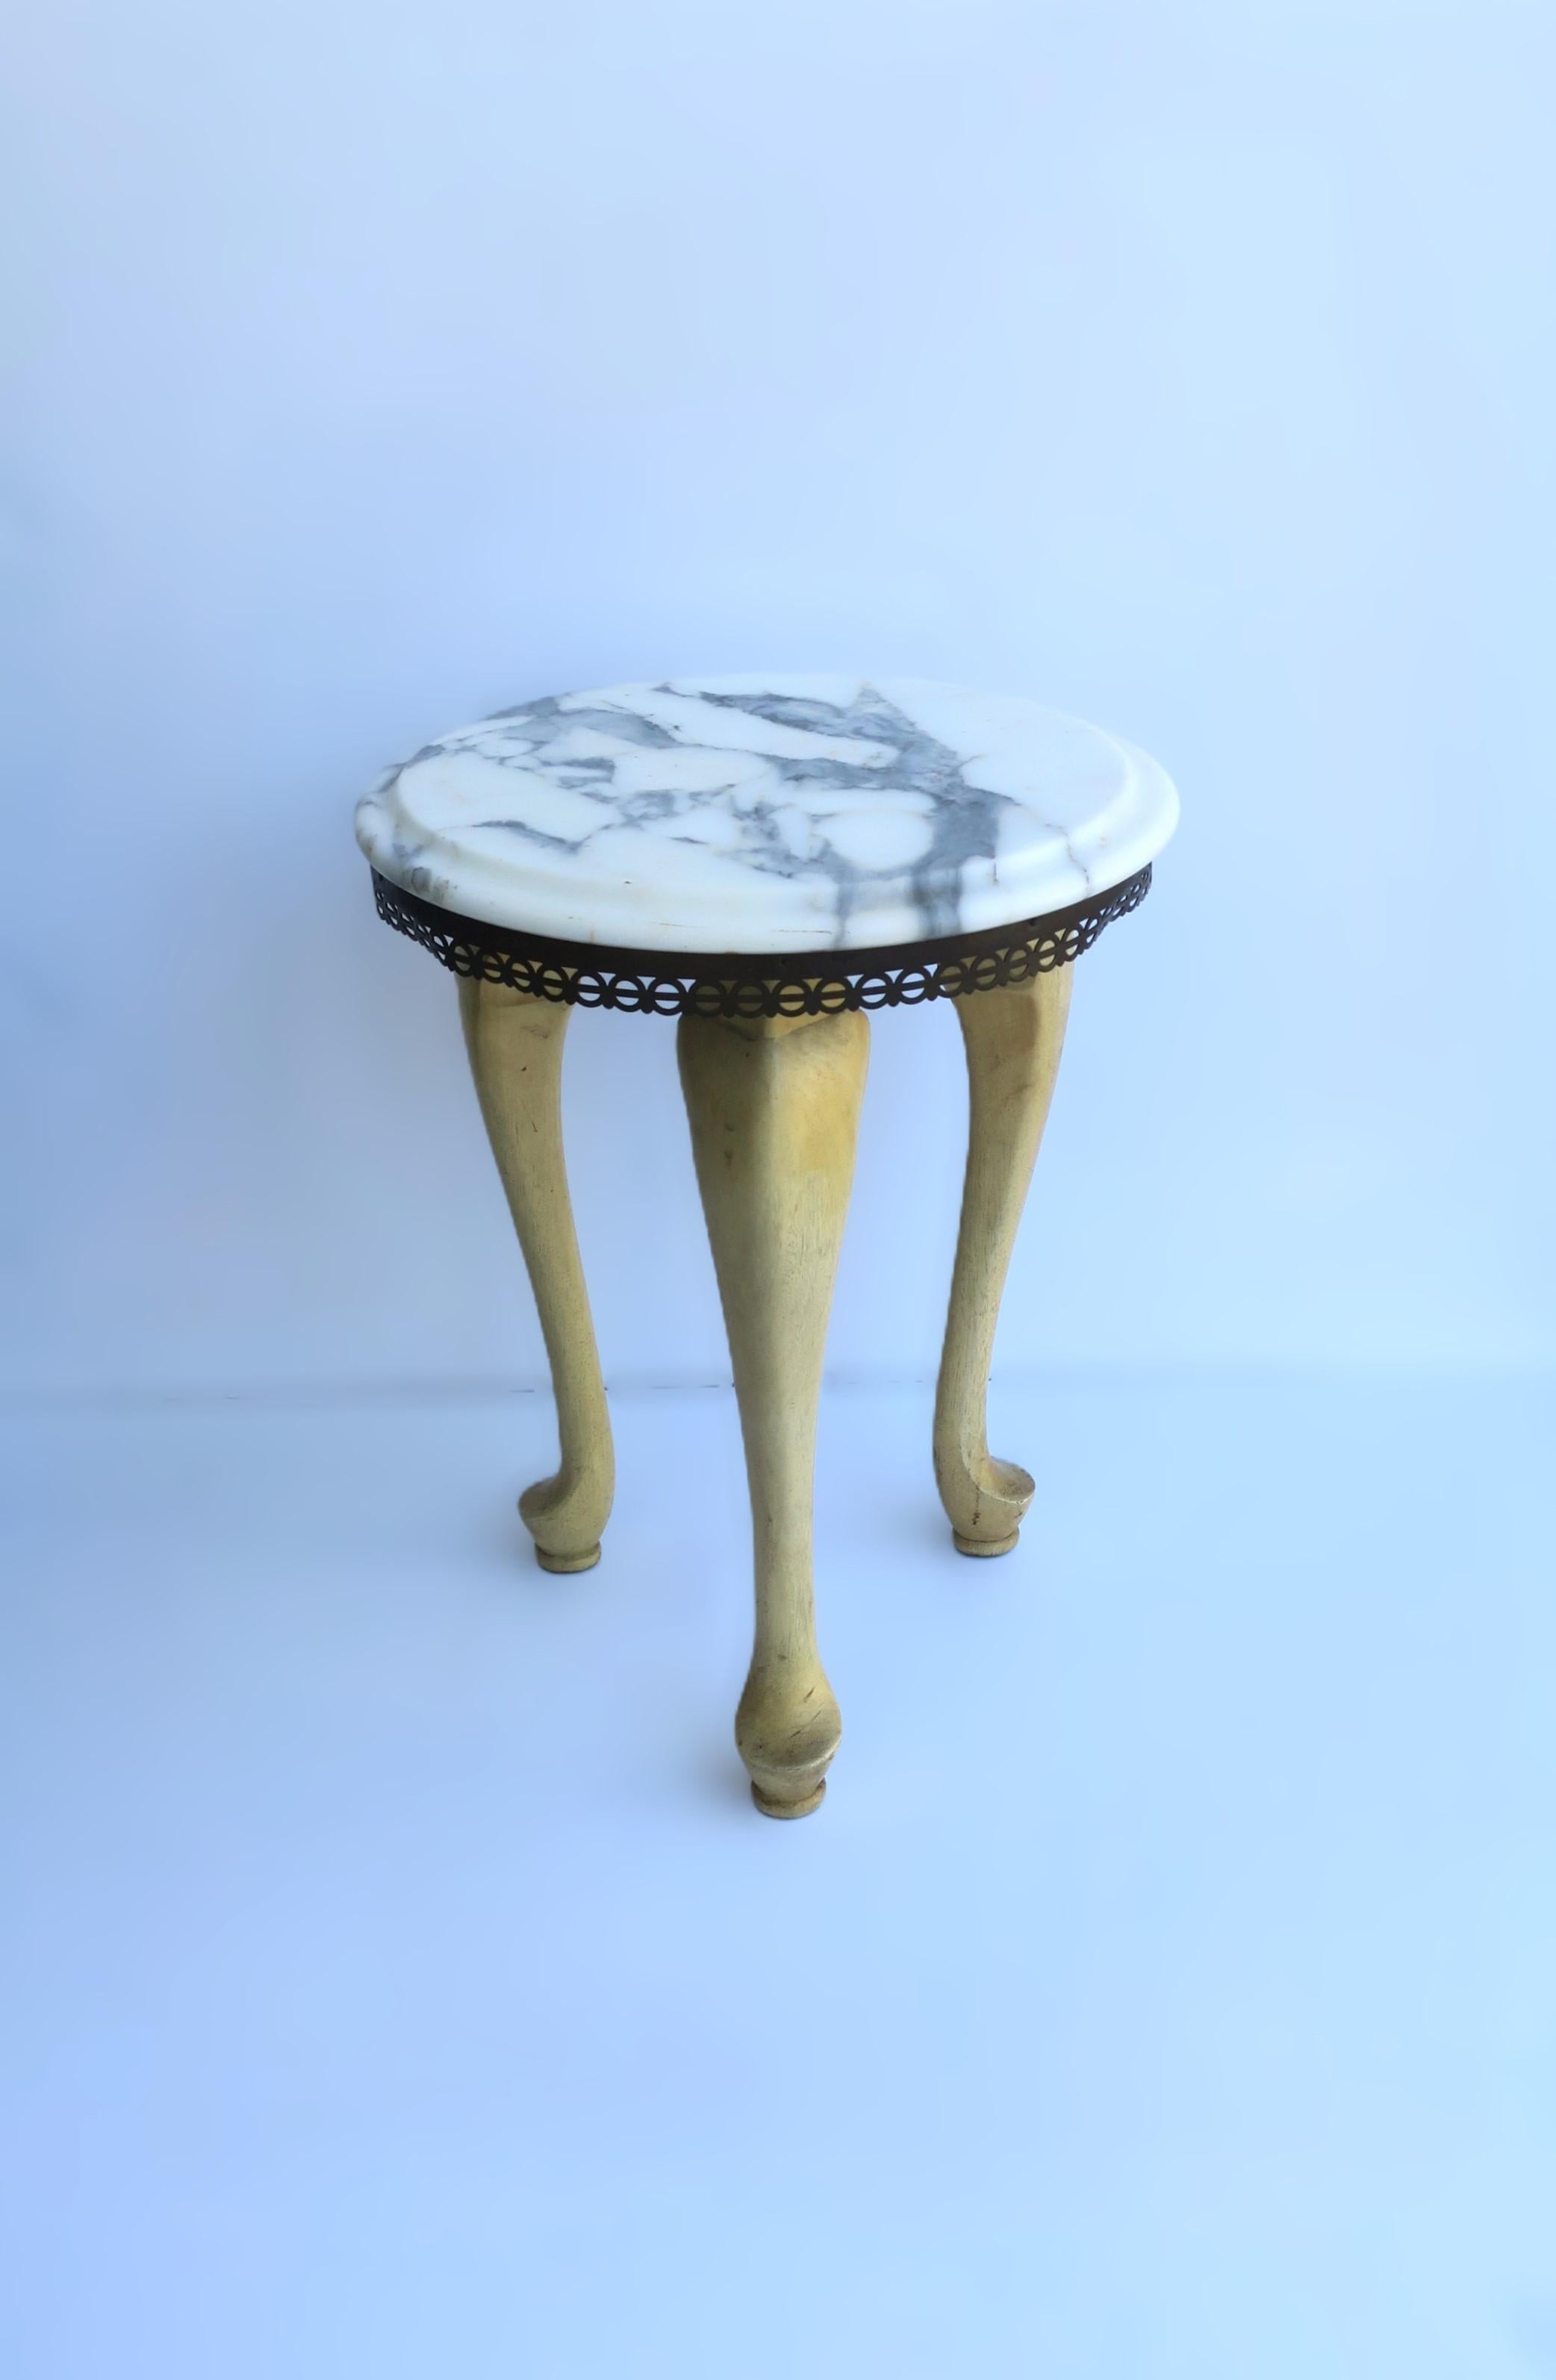 **One of two available, each sold separately, as per listing. 

An Italian marble and wood side or drinks table, in the Rococo style, circa early to mid-20th century, Italy. Table has a blonde wood base with a cabriole leg and pad feet, finished